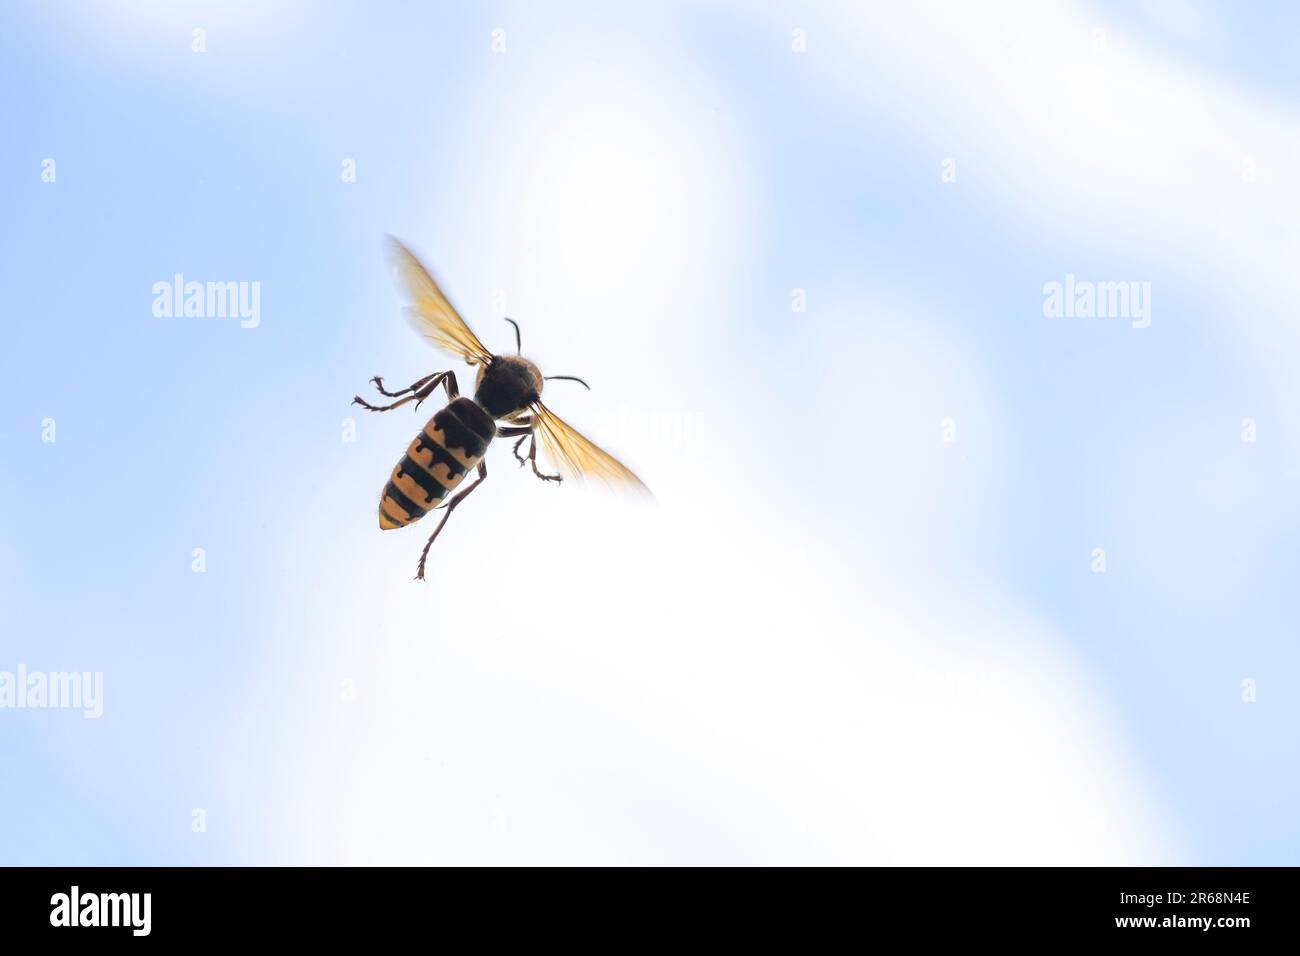 European Hornet (Vespa crabro) in flight against a blue sky with white clouds, the insect is the largest wasp in Europe, copy space, motion blur, sele Stock Photo